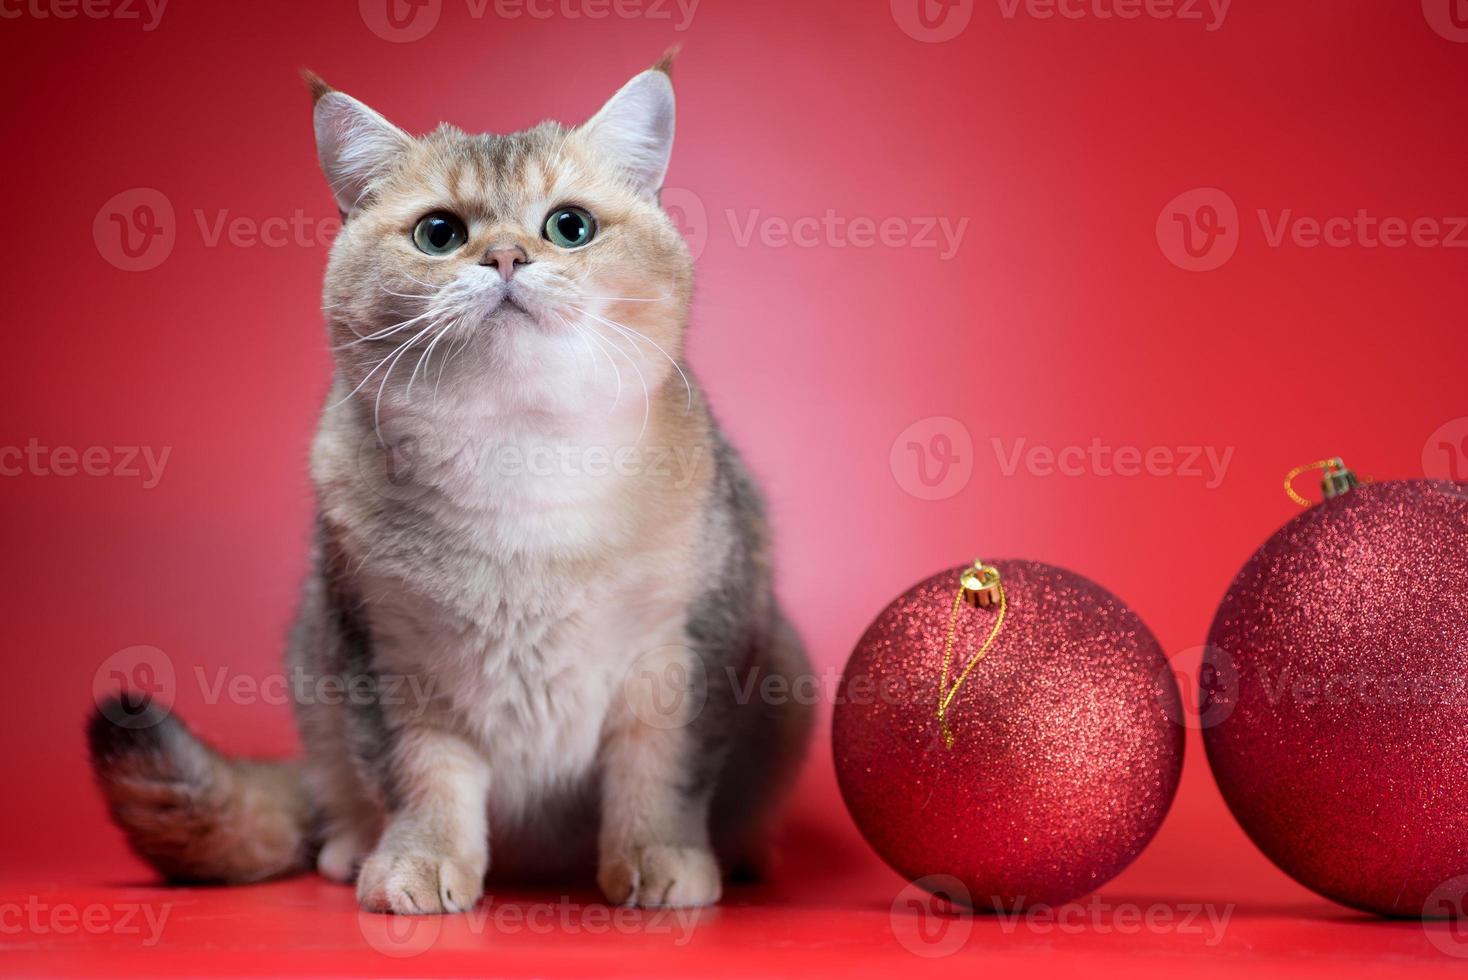 British shorthair cat looks up next to two large Christmas balls on a red background photo